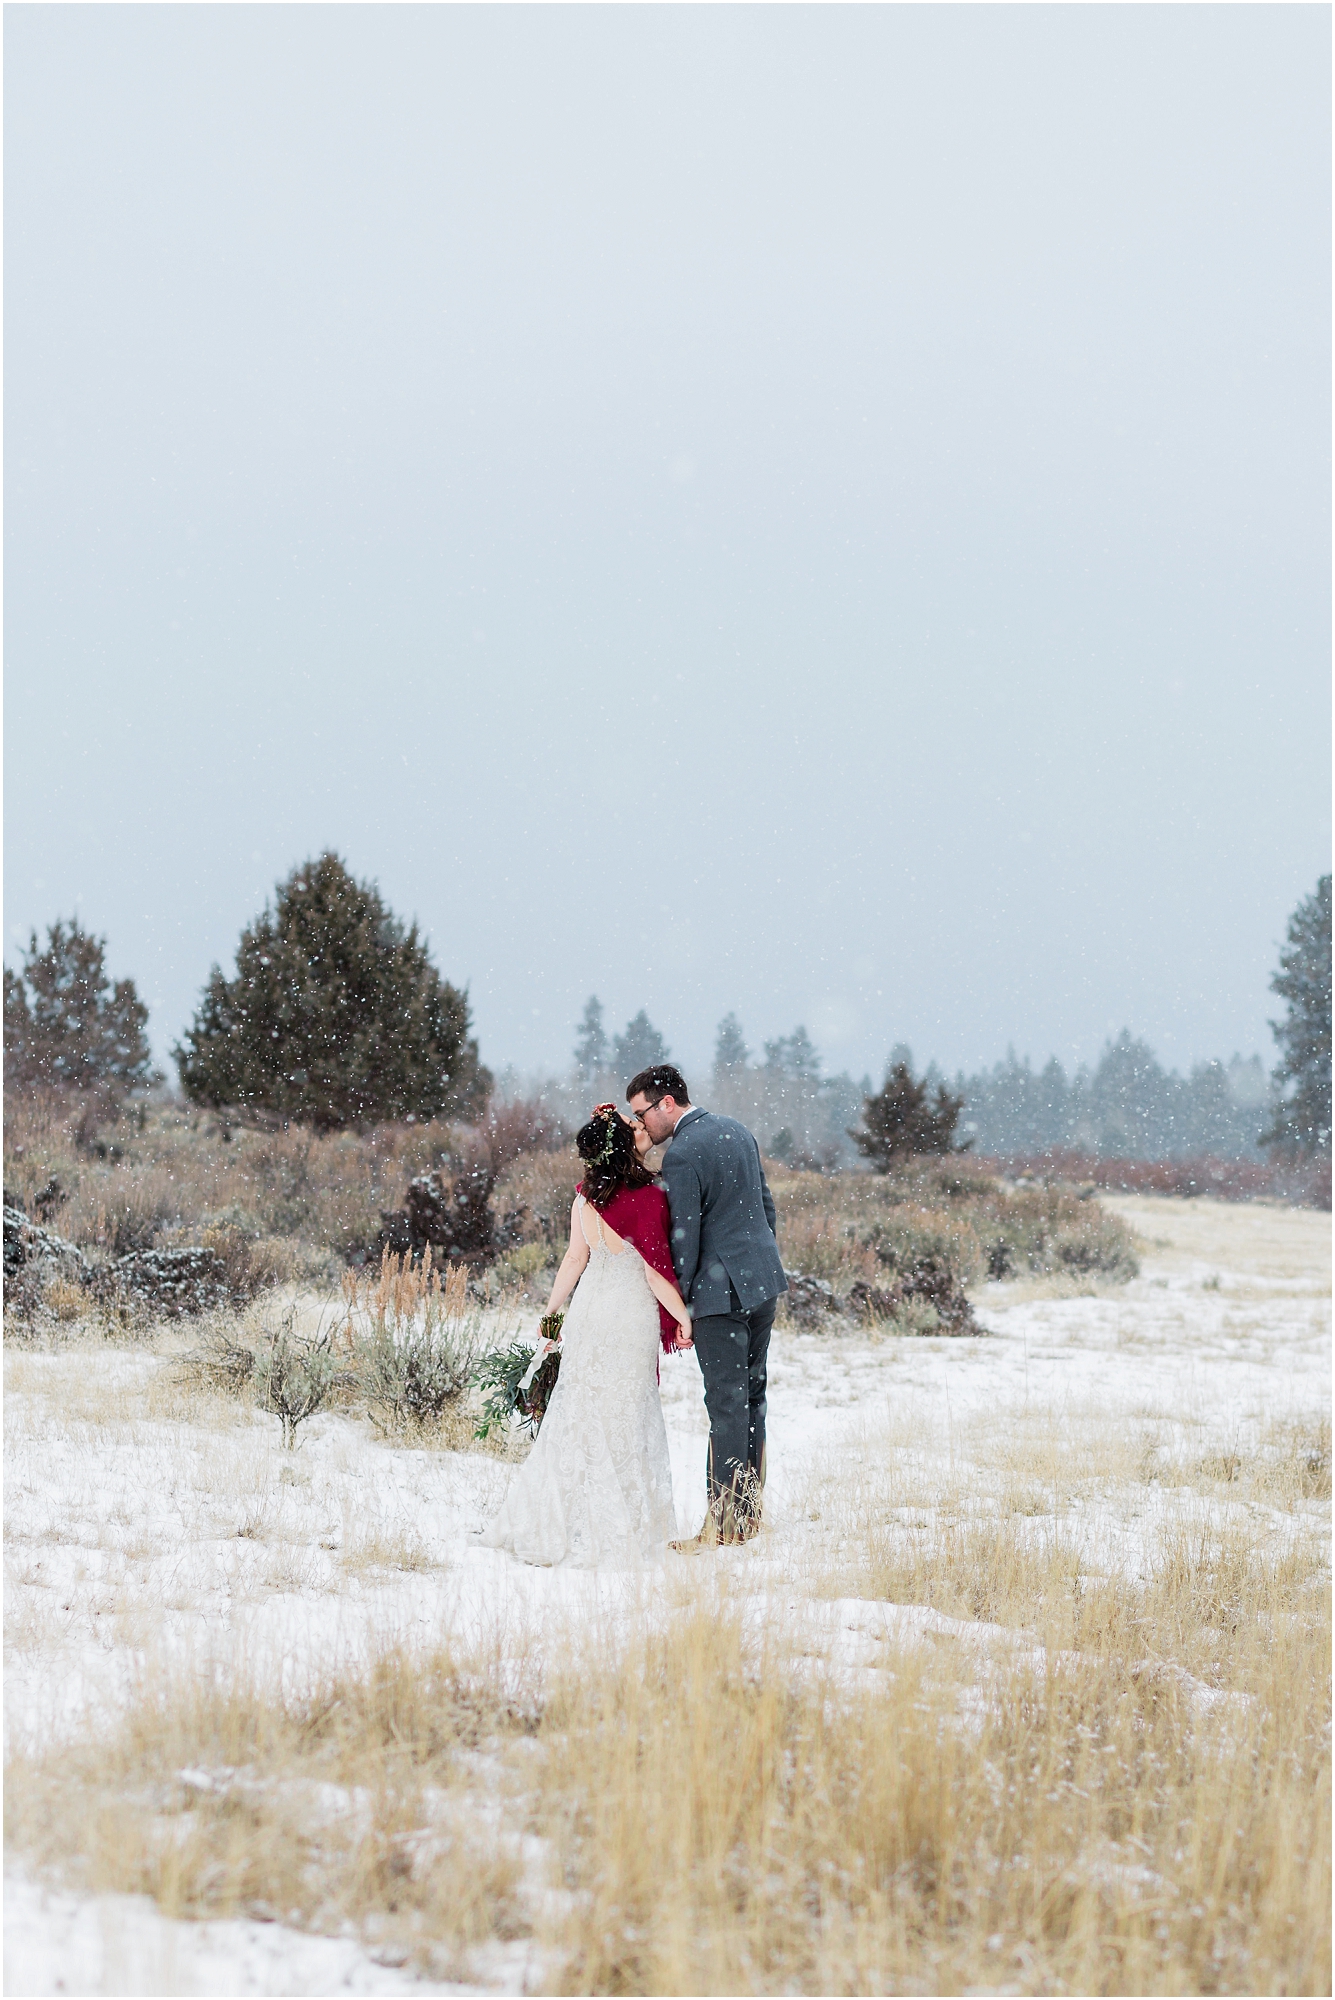 A bride wearing white with a red shawl, and a groom with a gray suit with burgundy accents walks along a snowy path at their intimate Central Oregon winter elopement near Five Pine Lodge in Sisters. | Erica Swantek Photography